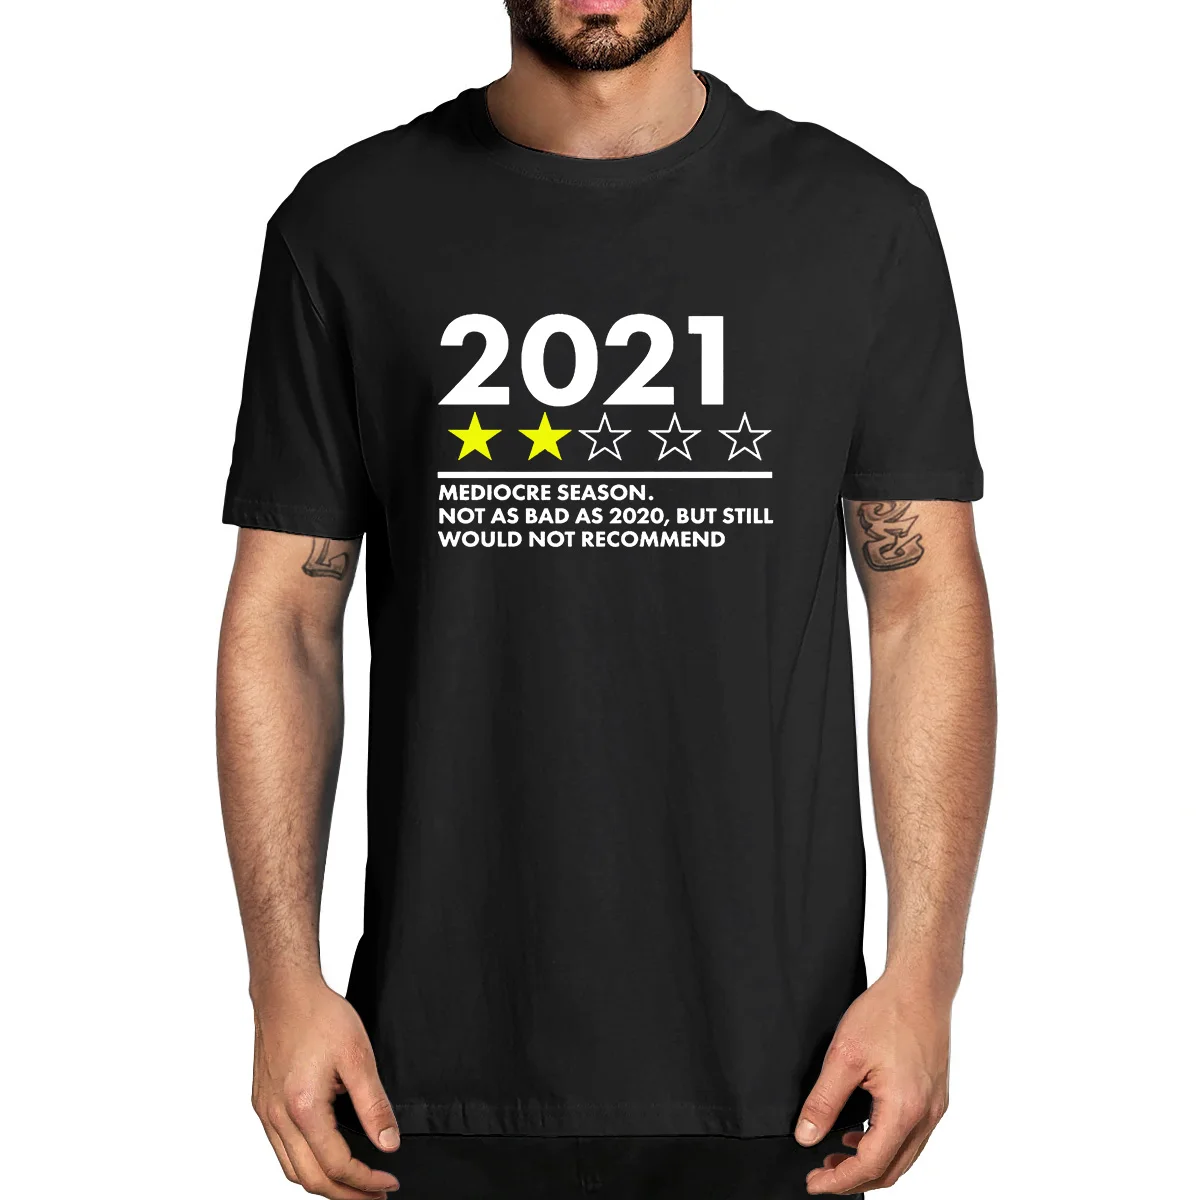 

2021 Mediocre Season Not As Bad As 2020 But Still Would Not Recommend Men's 100% Cotton Novelty T-Shirt Unisex Humor Funny Women